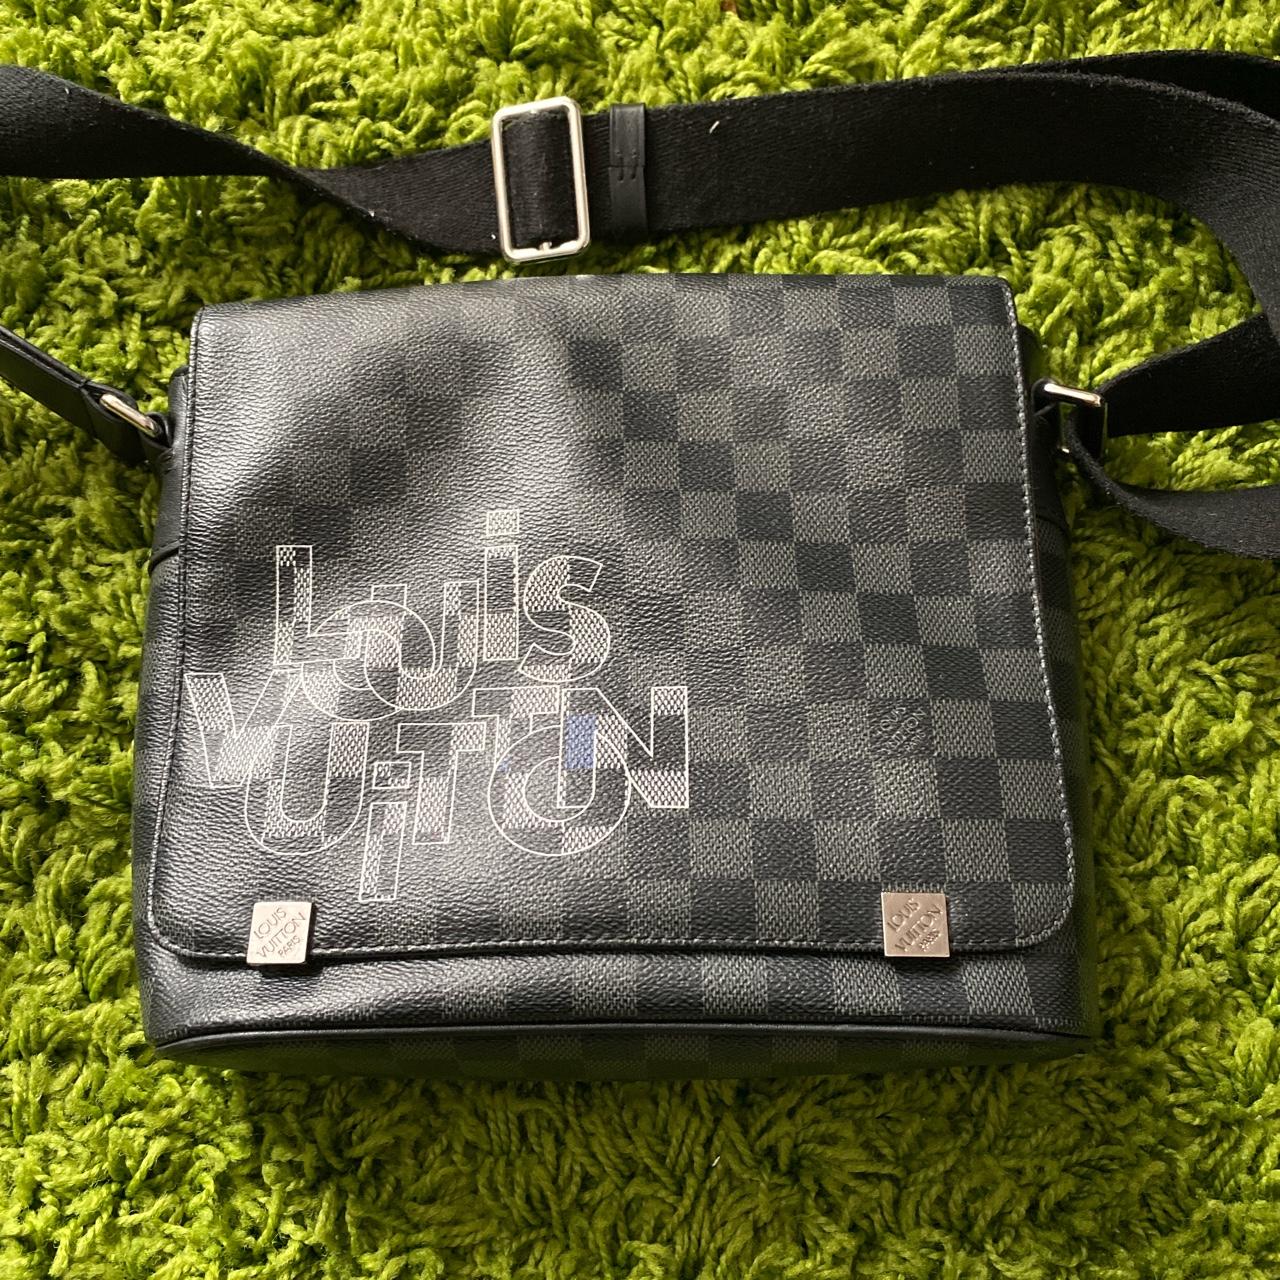 Original LV shoes bought from Paris with box and bag - Depop